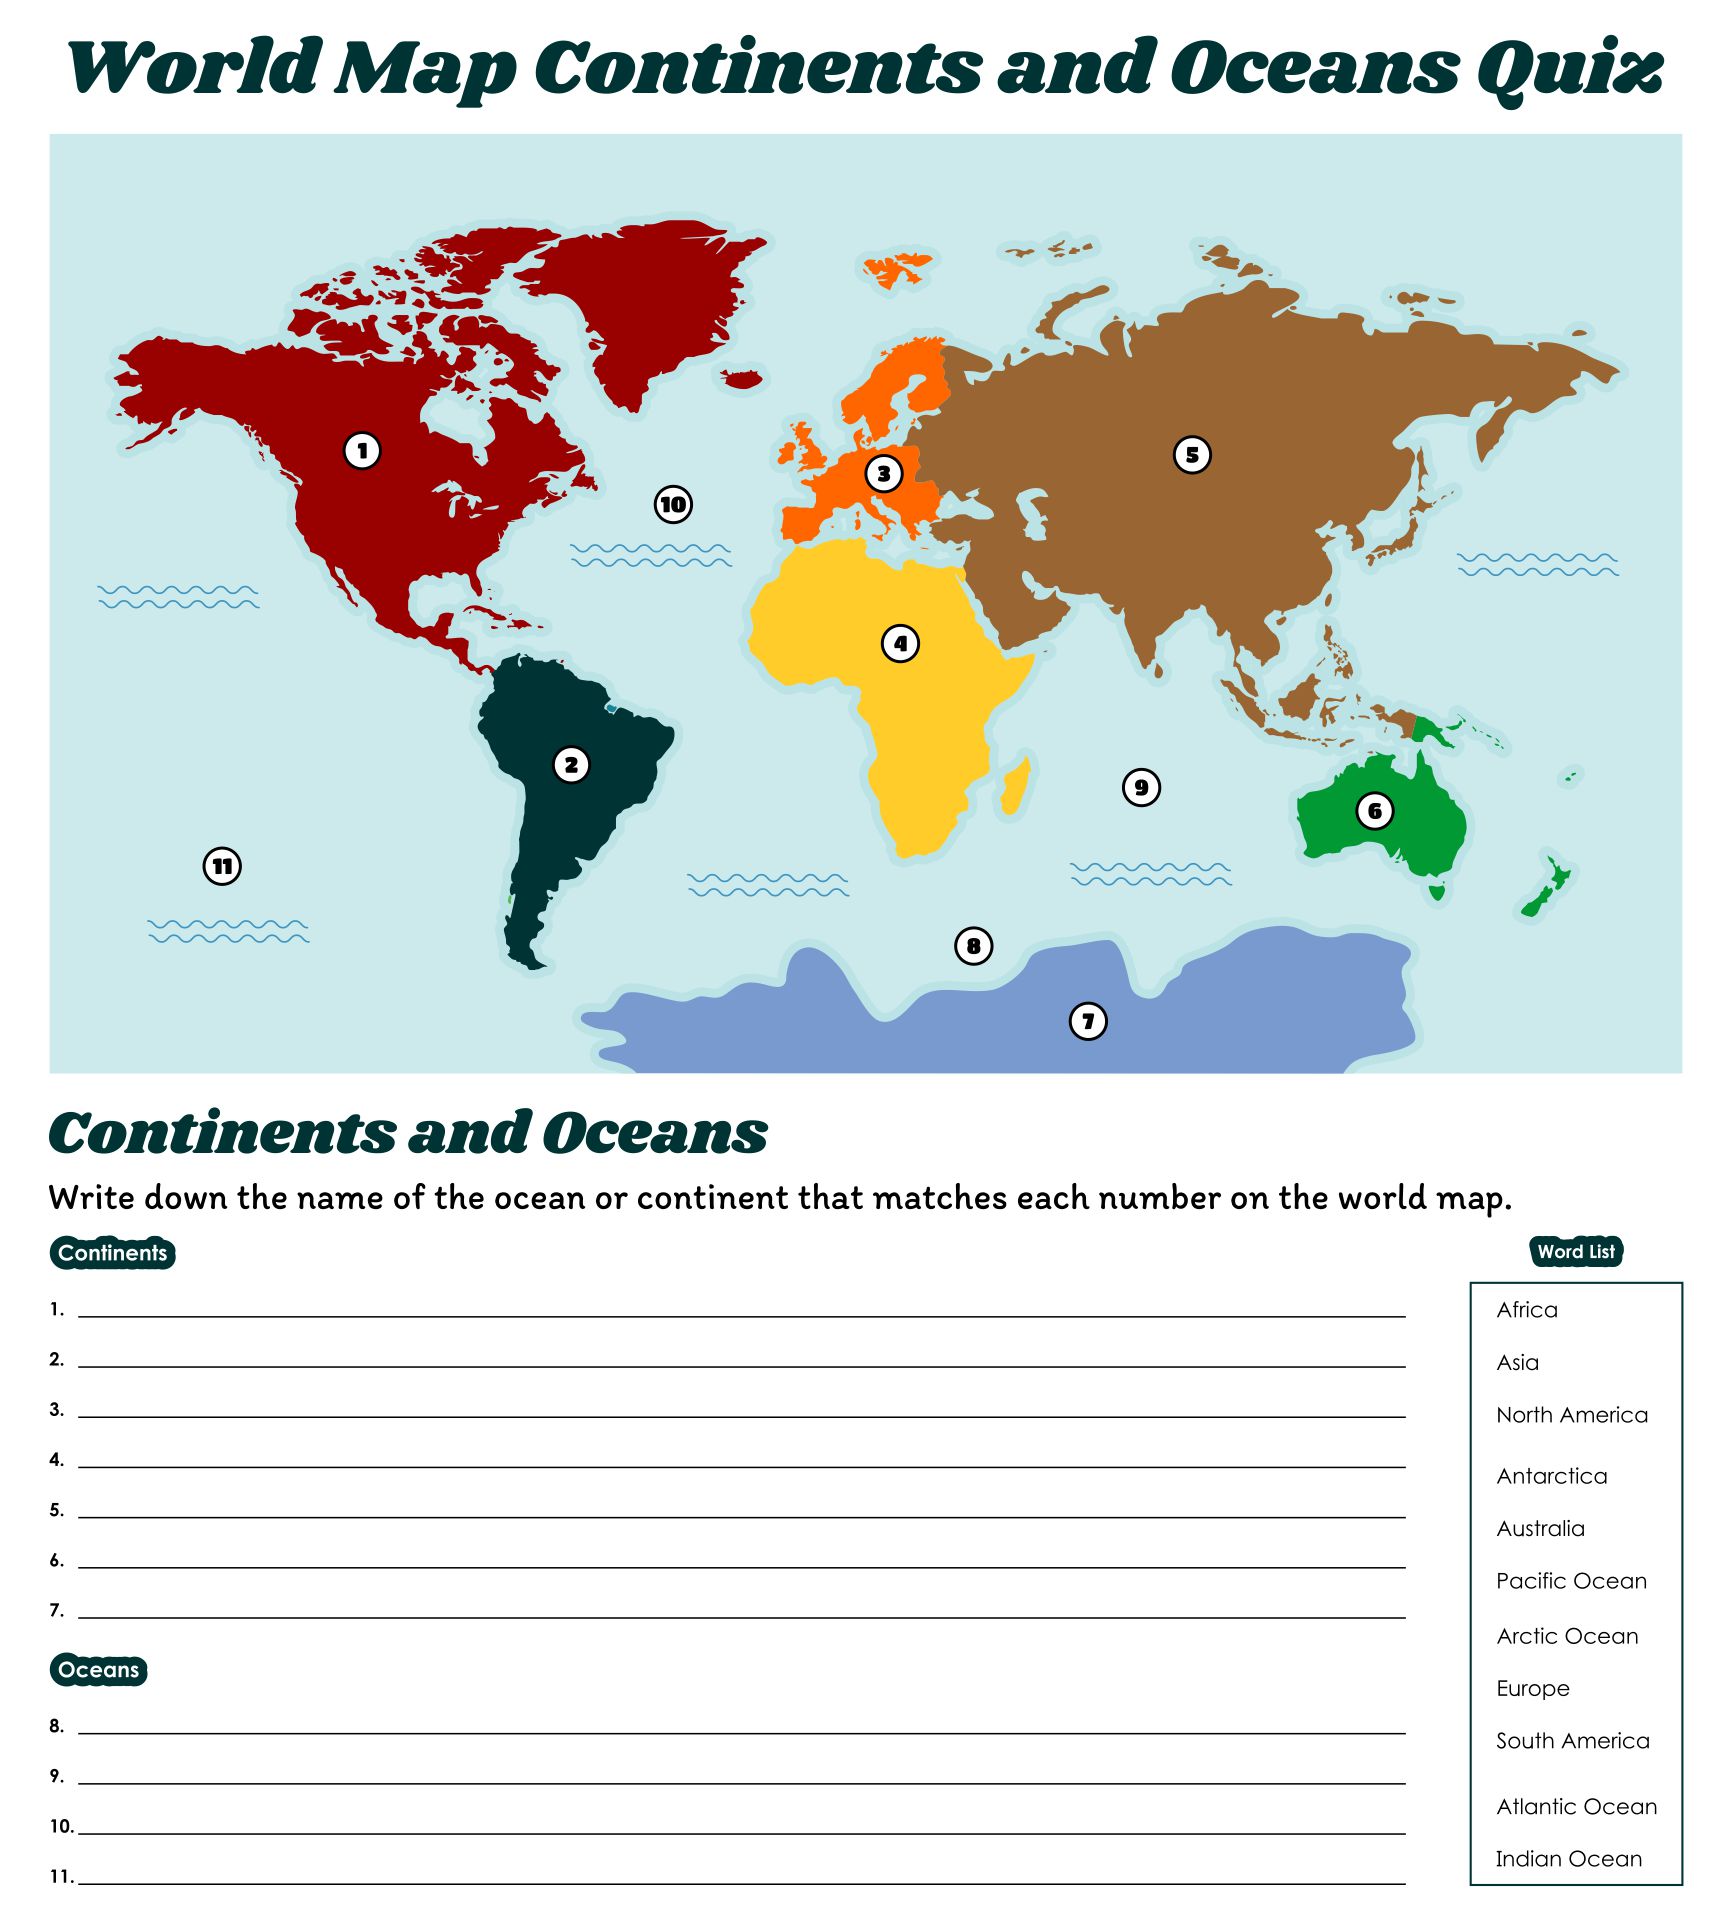 5-best-images-of-continents-and-oceans-map-printable-unlabeled-world-map-continents-and-oceans